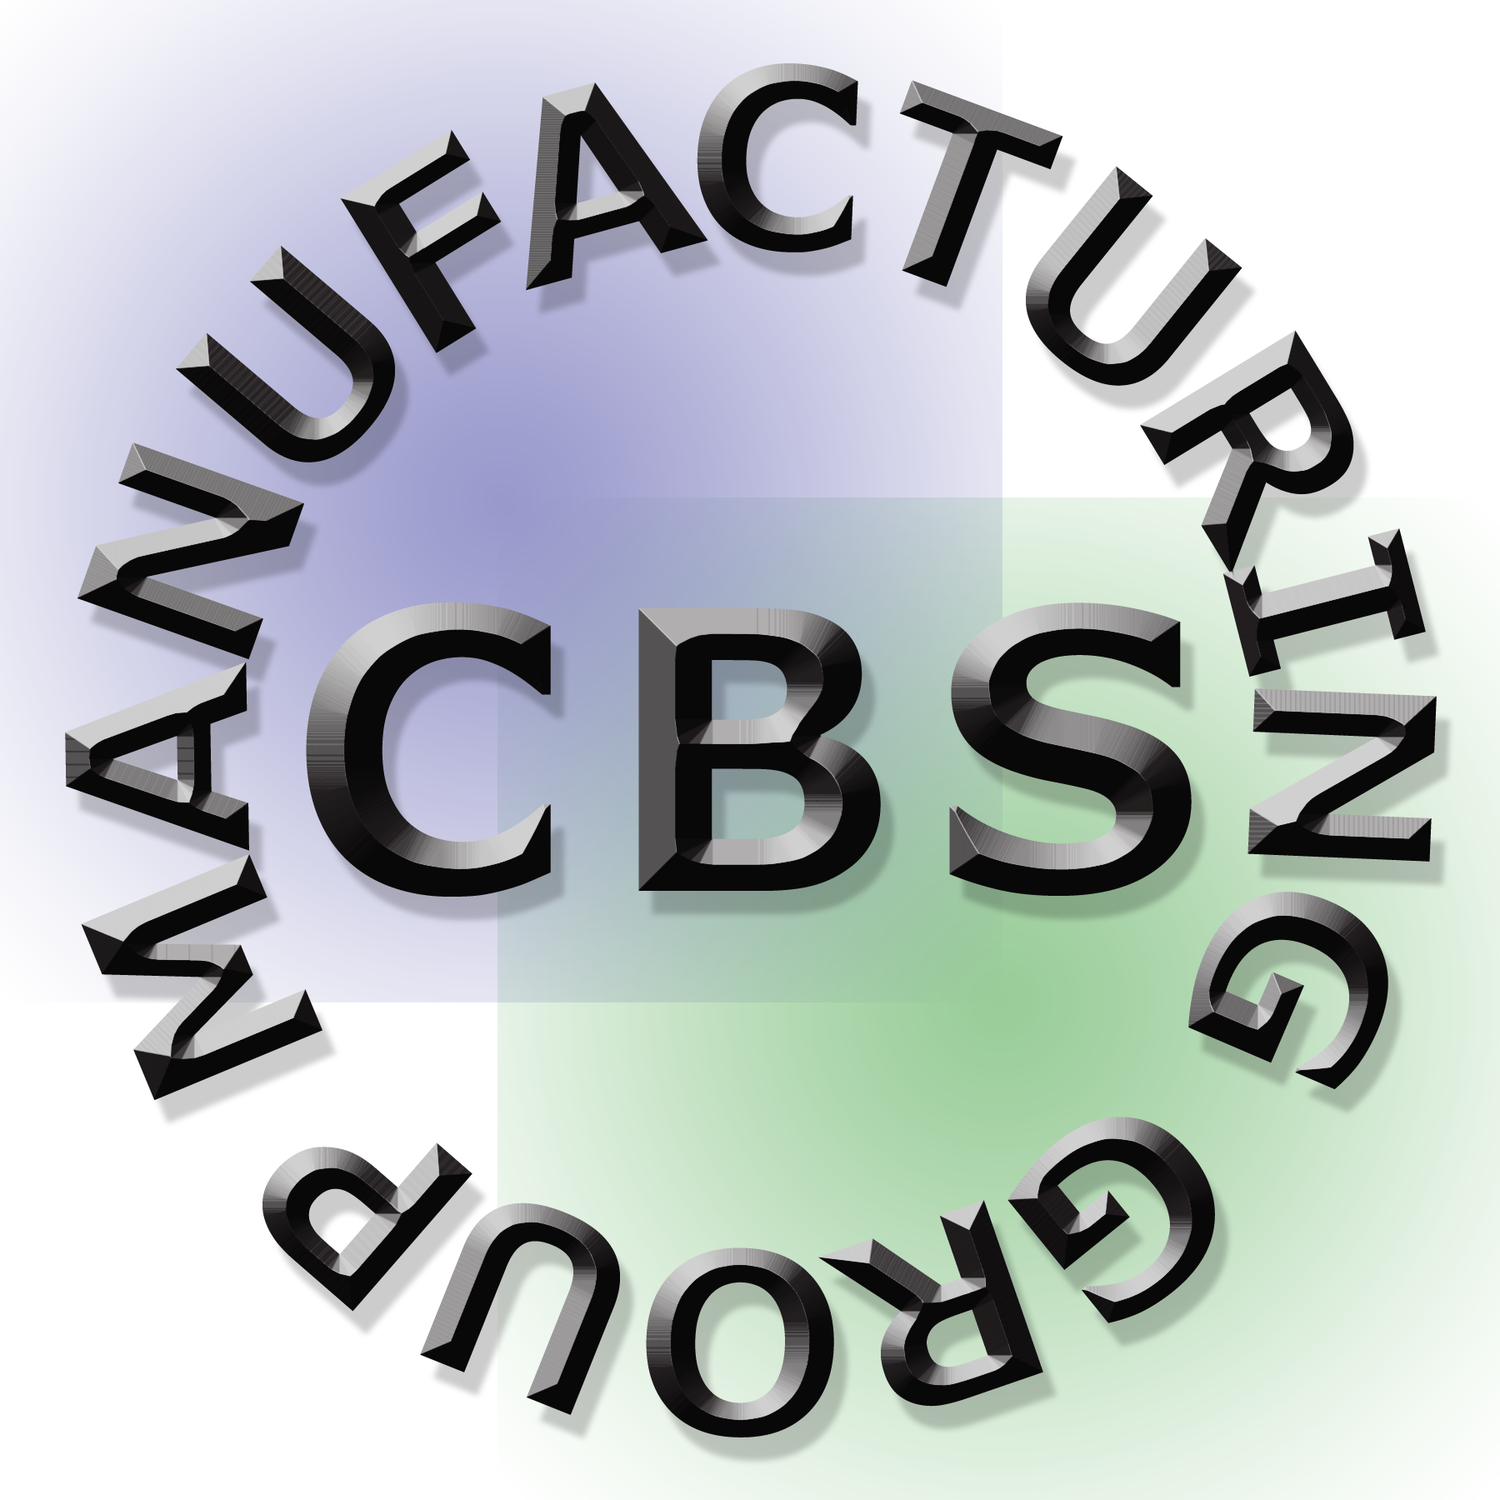 CBS Manufacturing Group